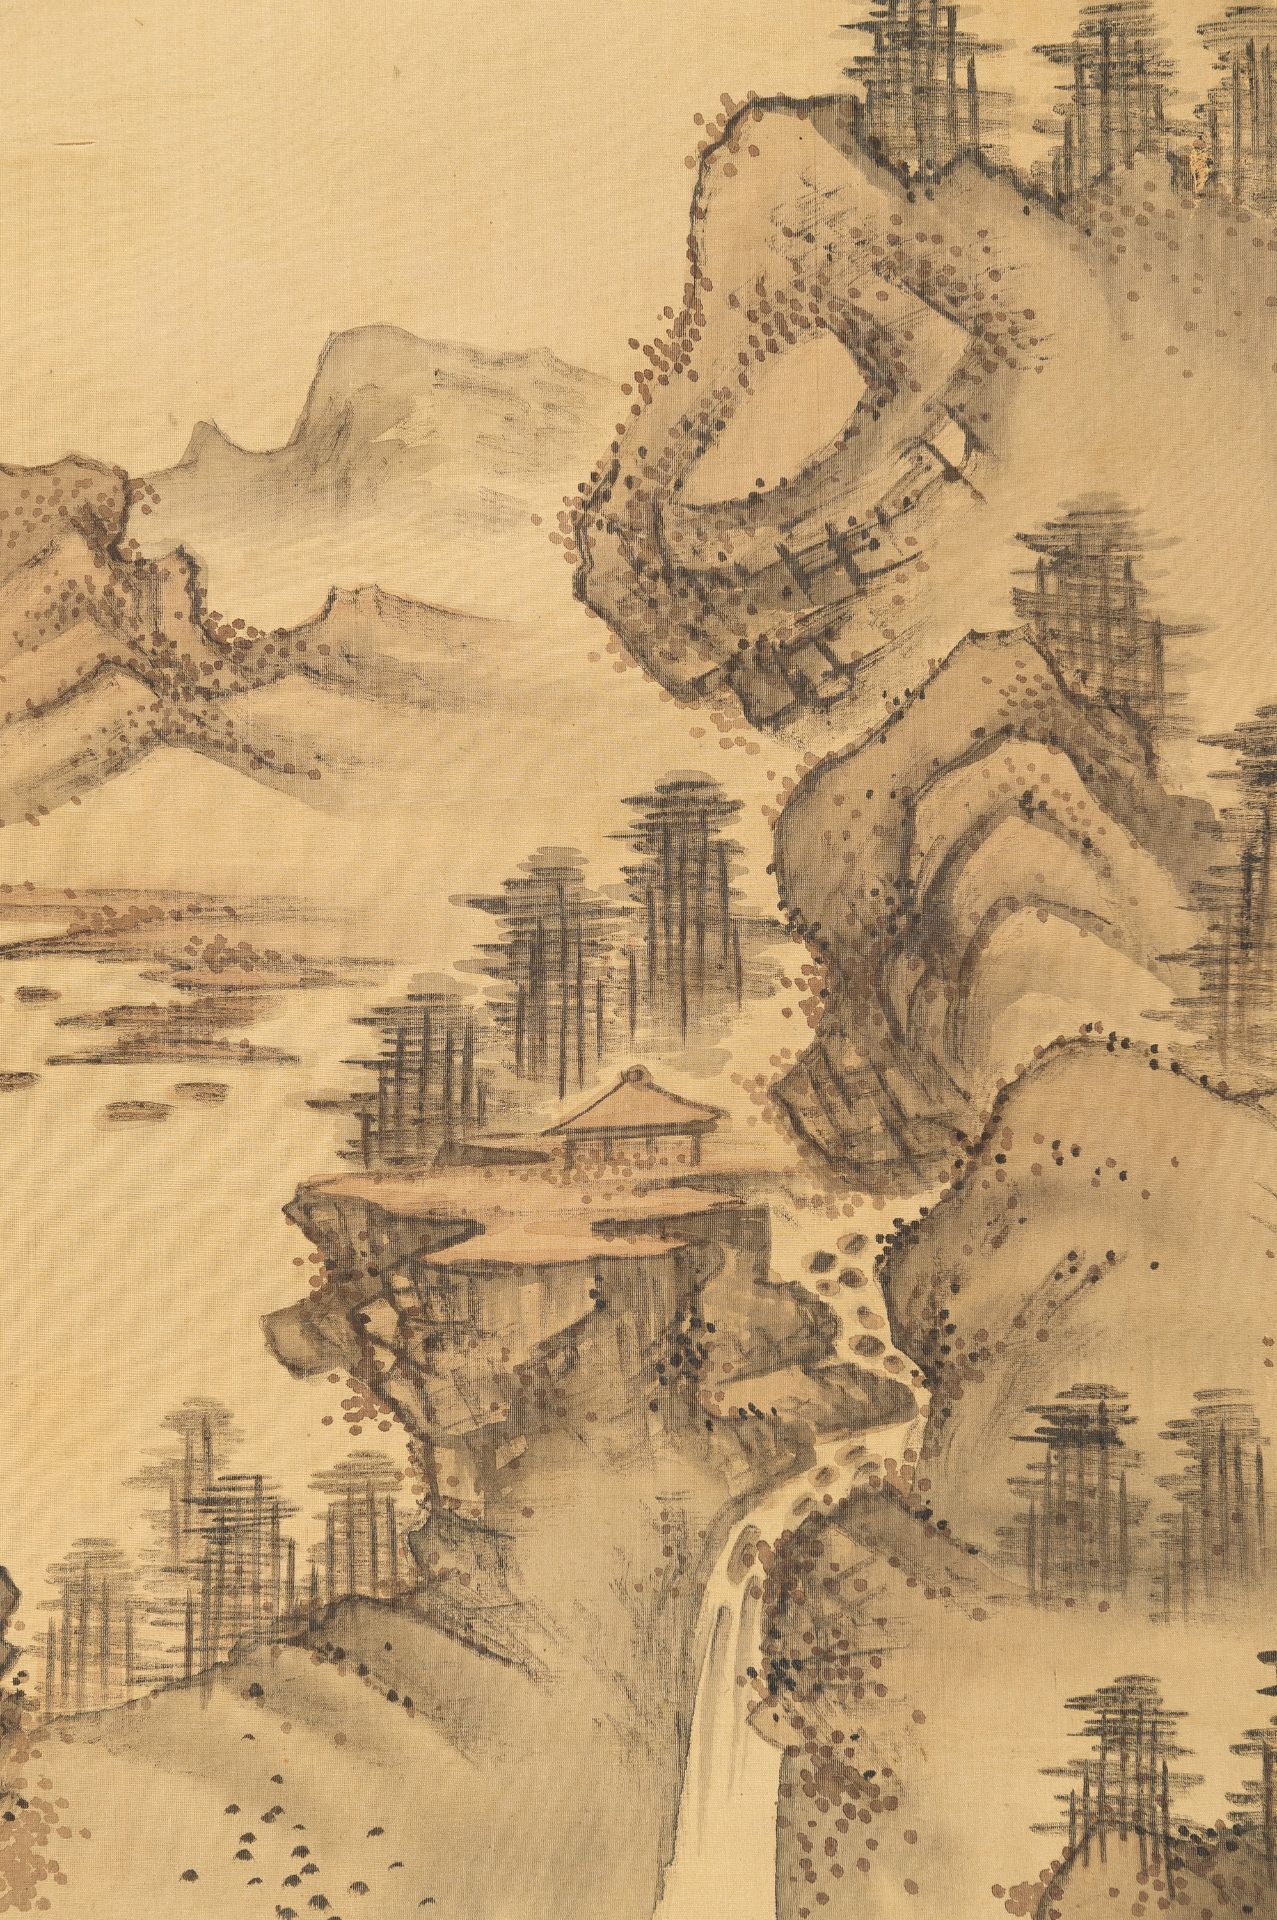 TANOMURA CHOKUNYÃ› (1814-1907): A SCROLL PAINTING OF MOUNTAINS - Image 7 of 11